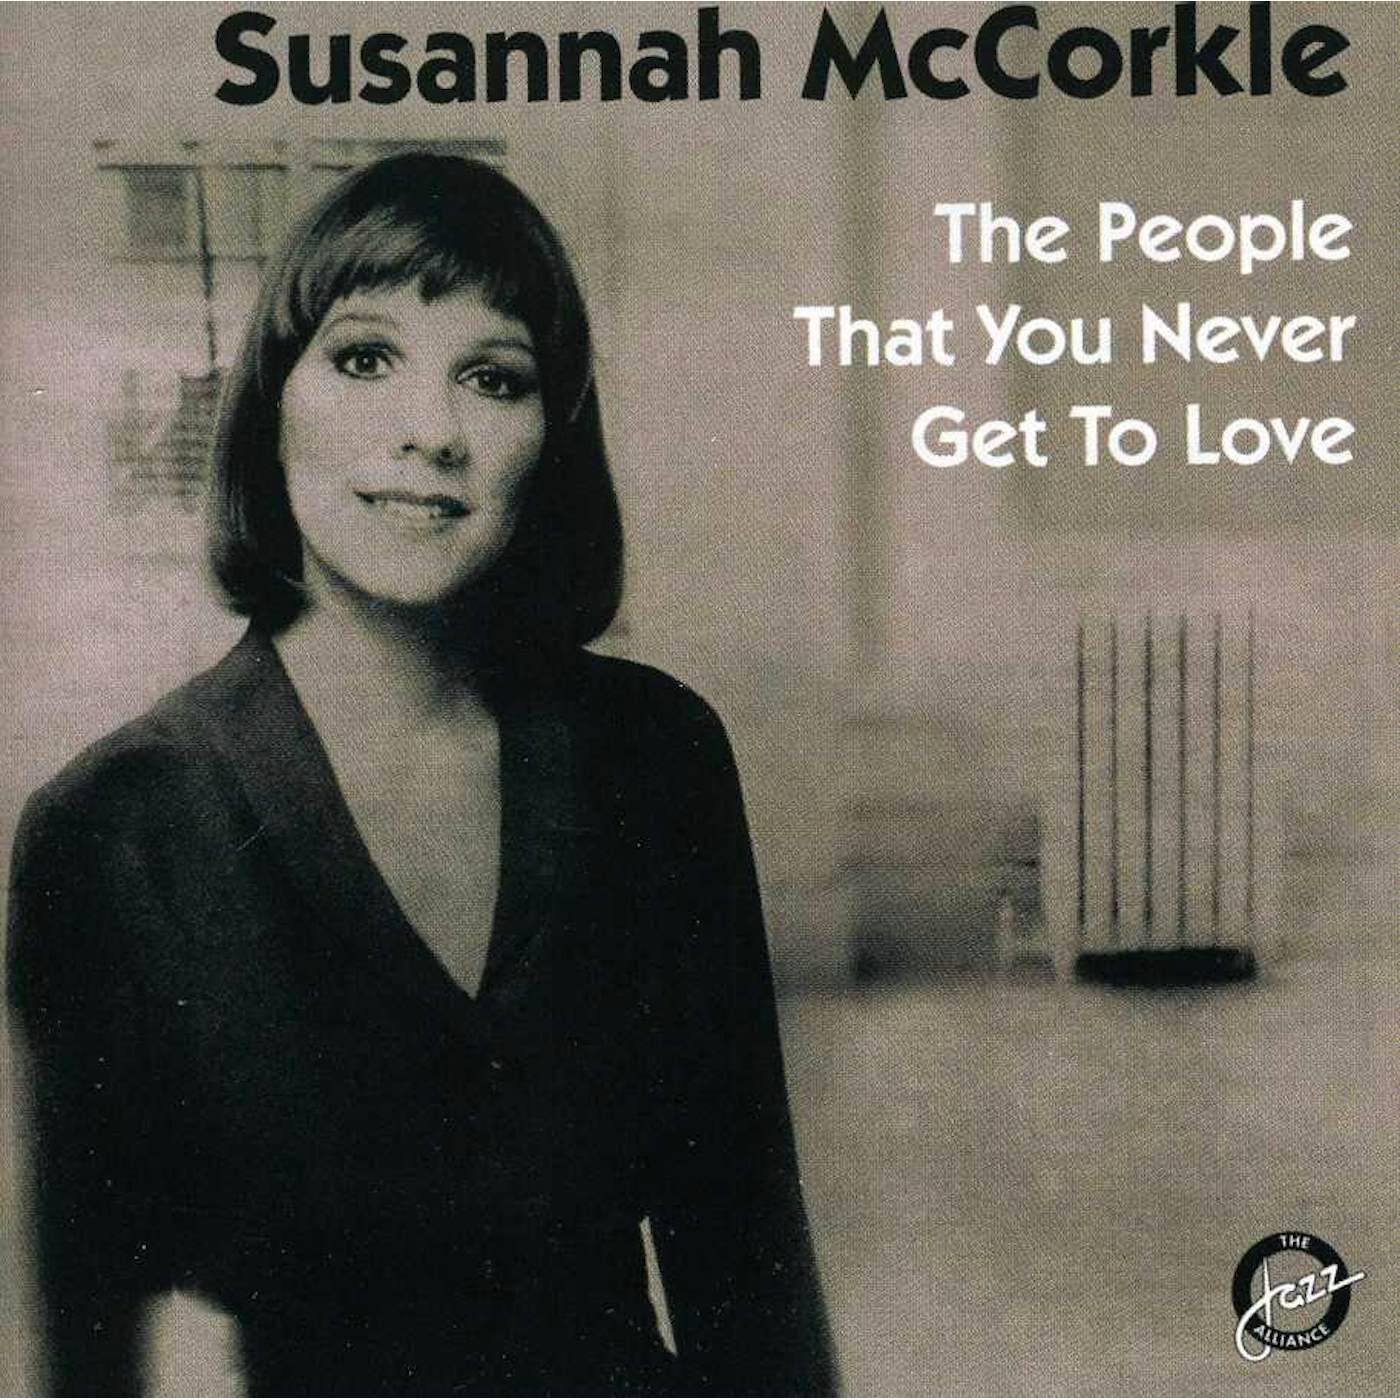 Susannah McCorkle PEOPLE THAT YOU NEVER GET TO LOVE CD